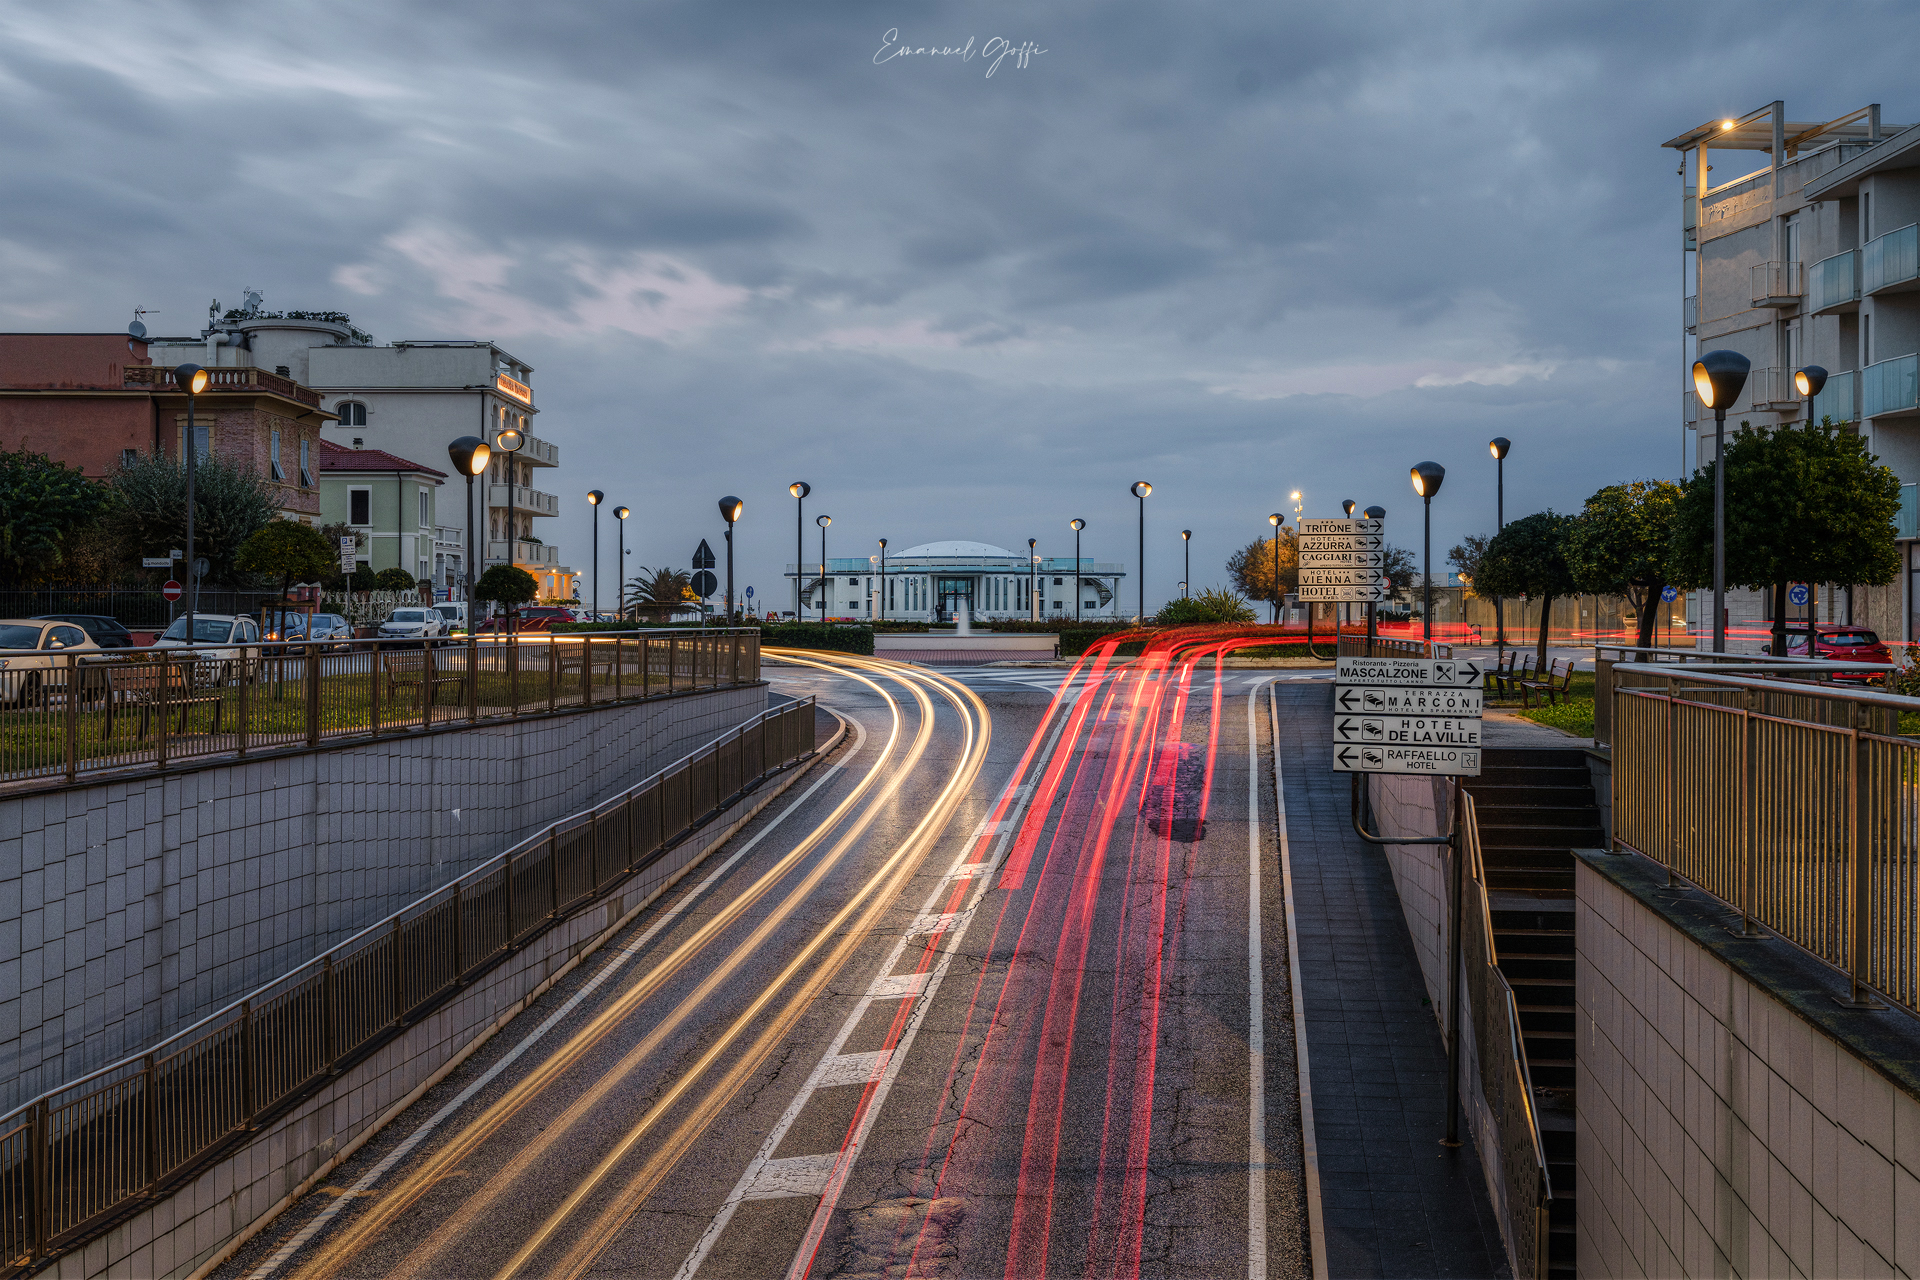 The roundabout by the sea - Senigallia - Marche...